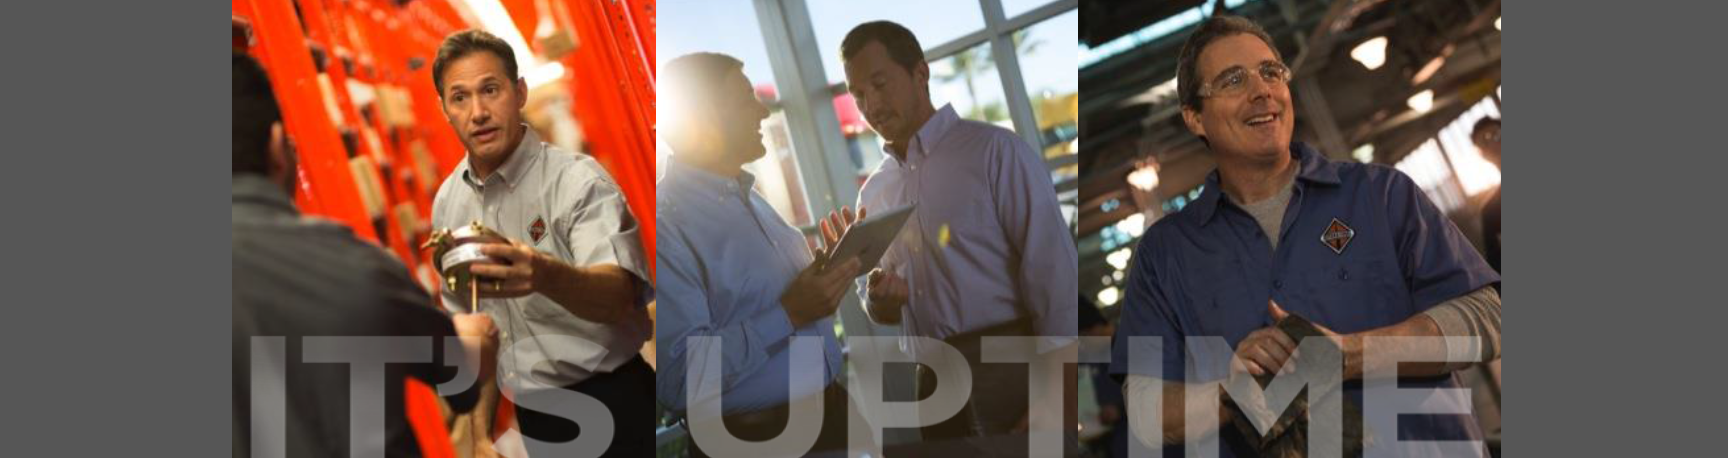 Triptych image of International® employees in action and text that says, "IT'S UPTIME"